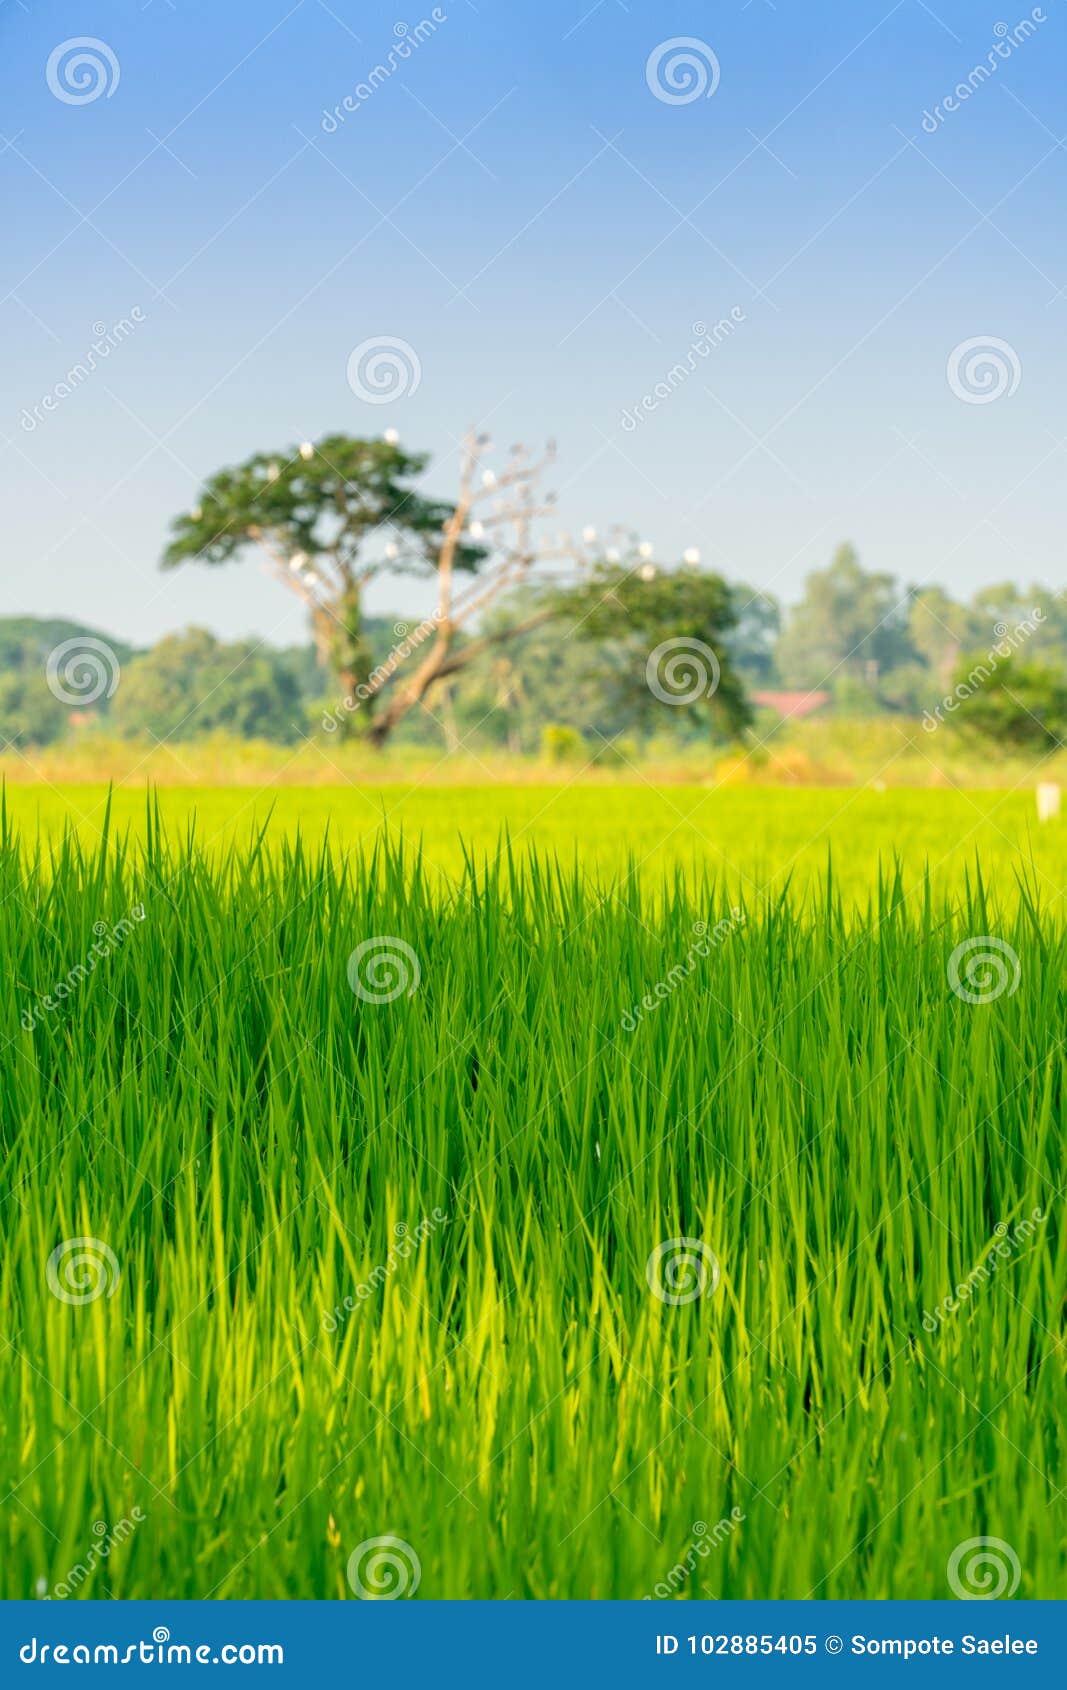 Rice Field with Soft Focus of a Tree in Background Portrait View Stock  Image - Image of male, nature: 102885405